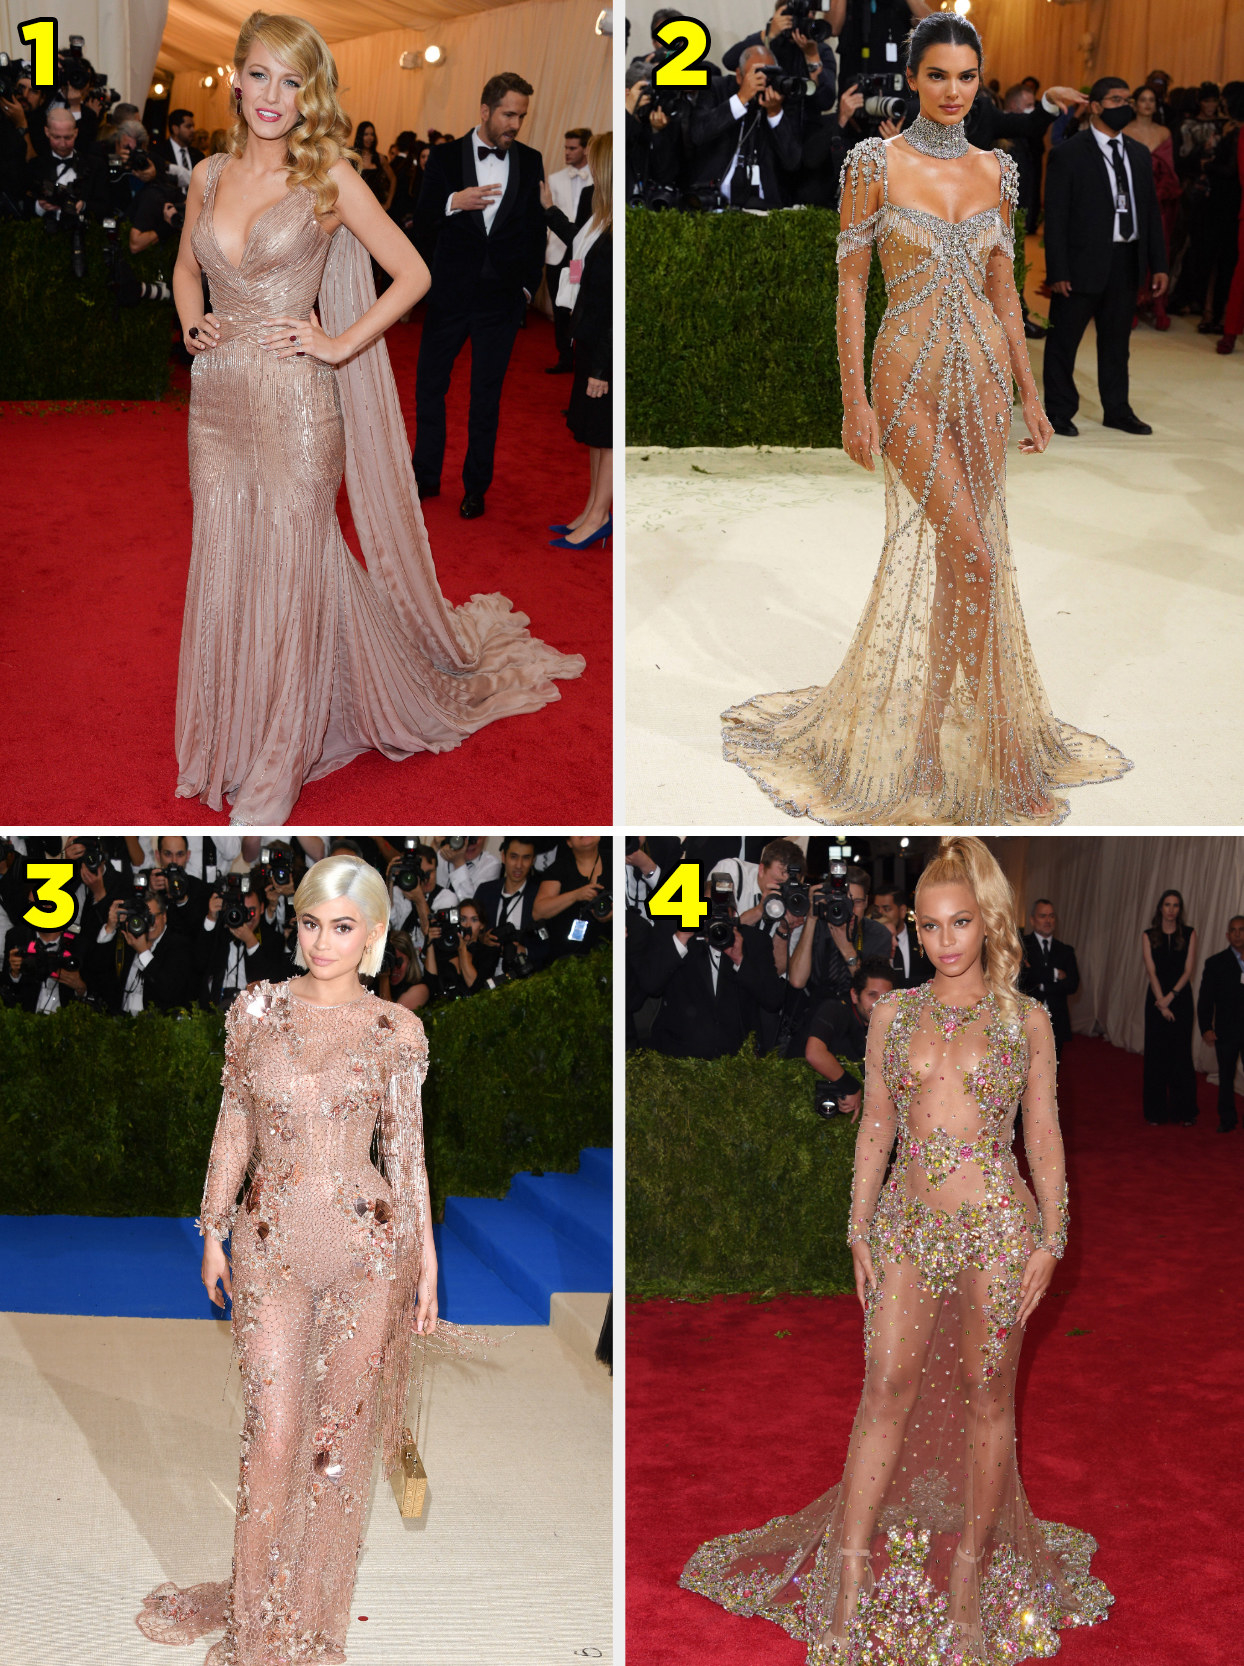 1. A sleeveless gown with a long cape. 2. A totally sheer gown with metal accents. 3. A totally sheer gown with floral appliques. 4. A totally sheer gown with metal ornate detailing.